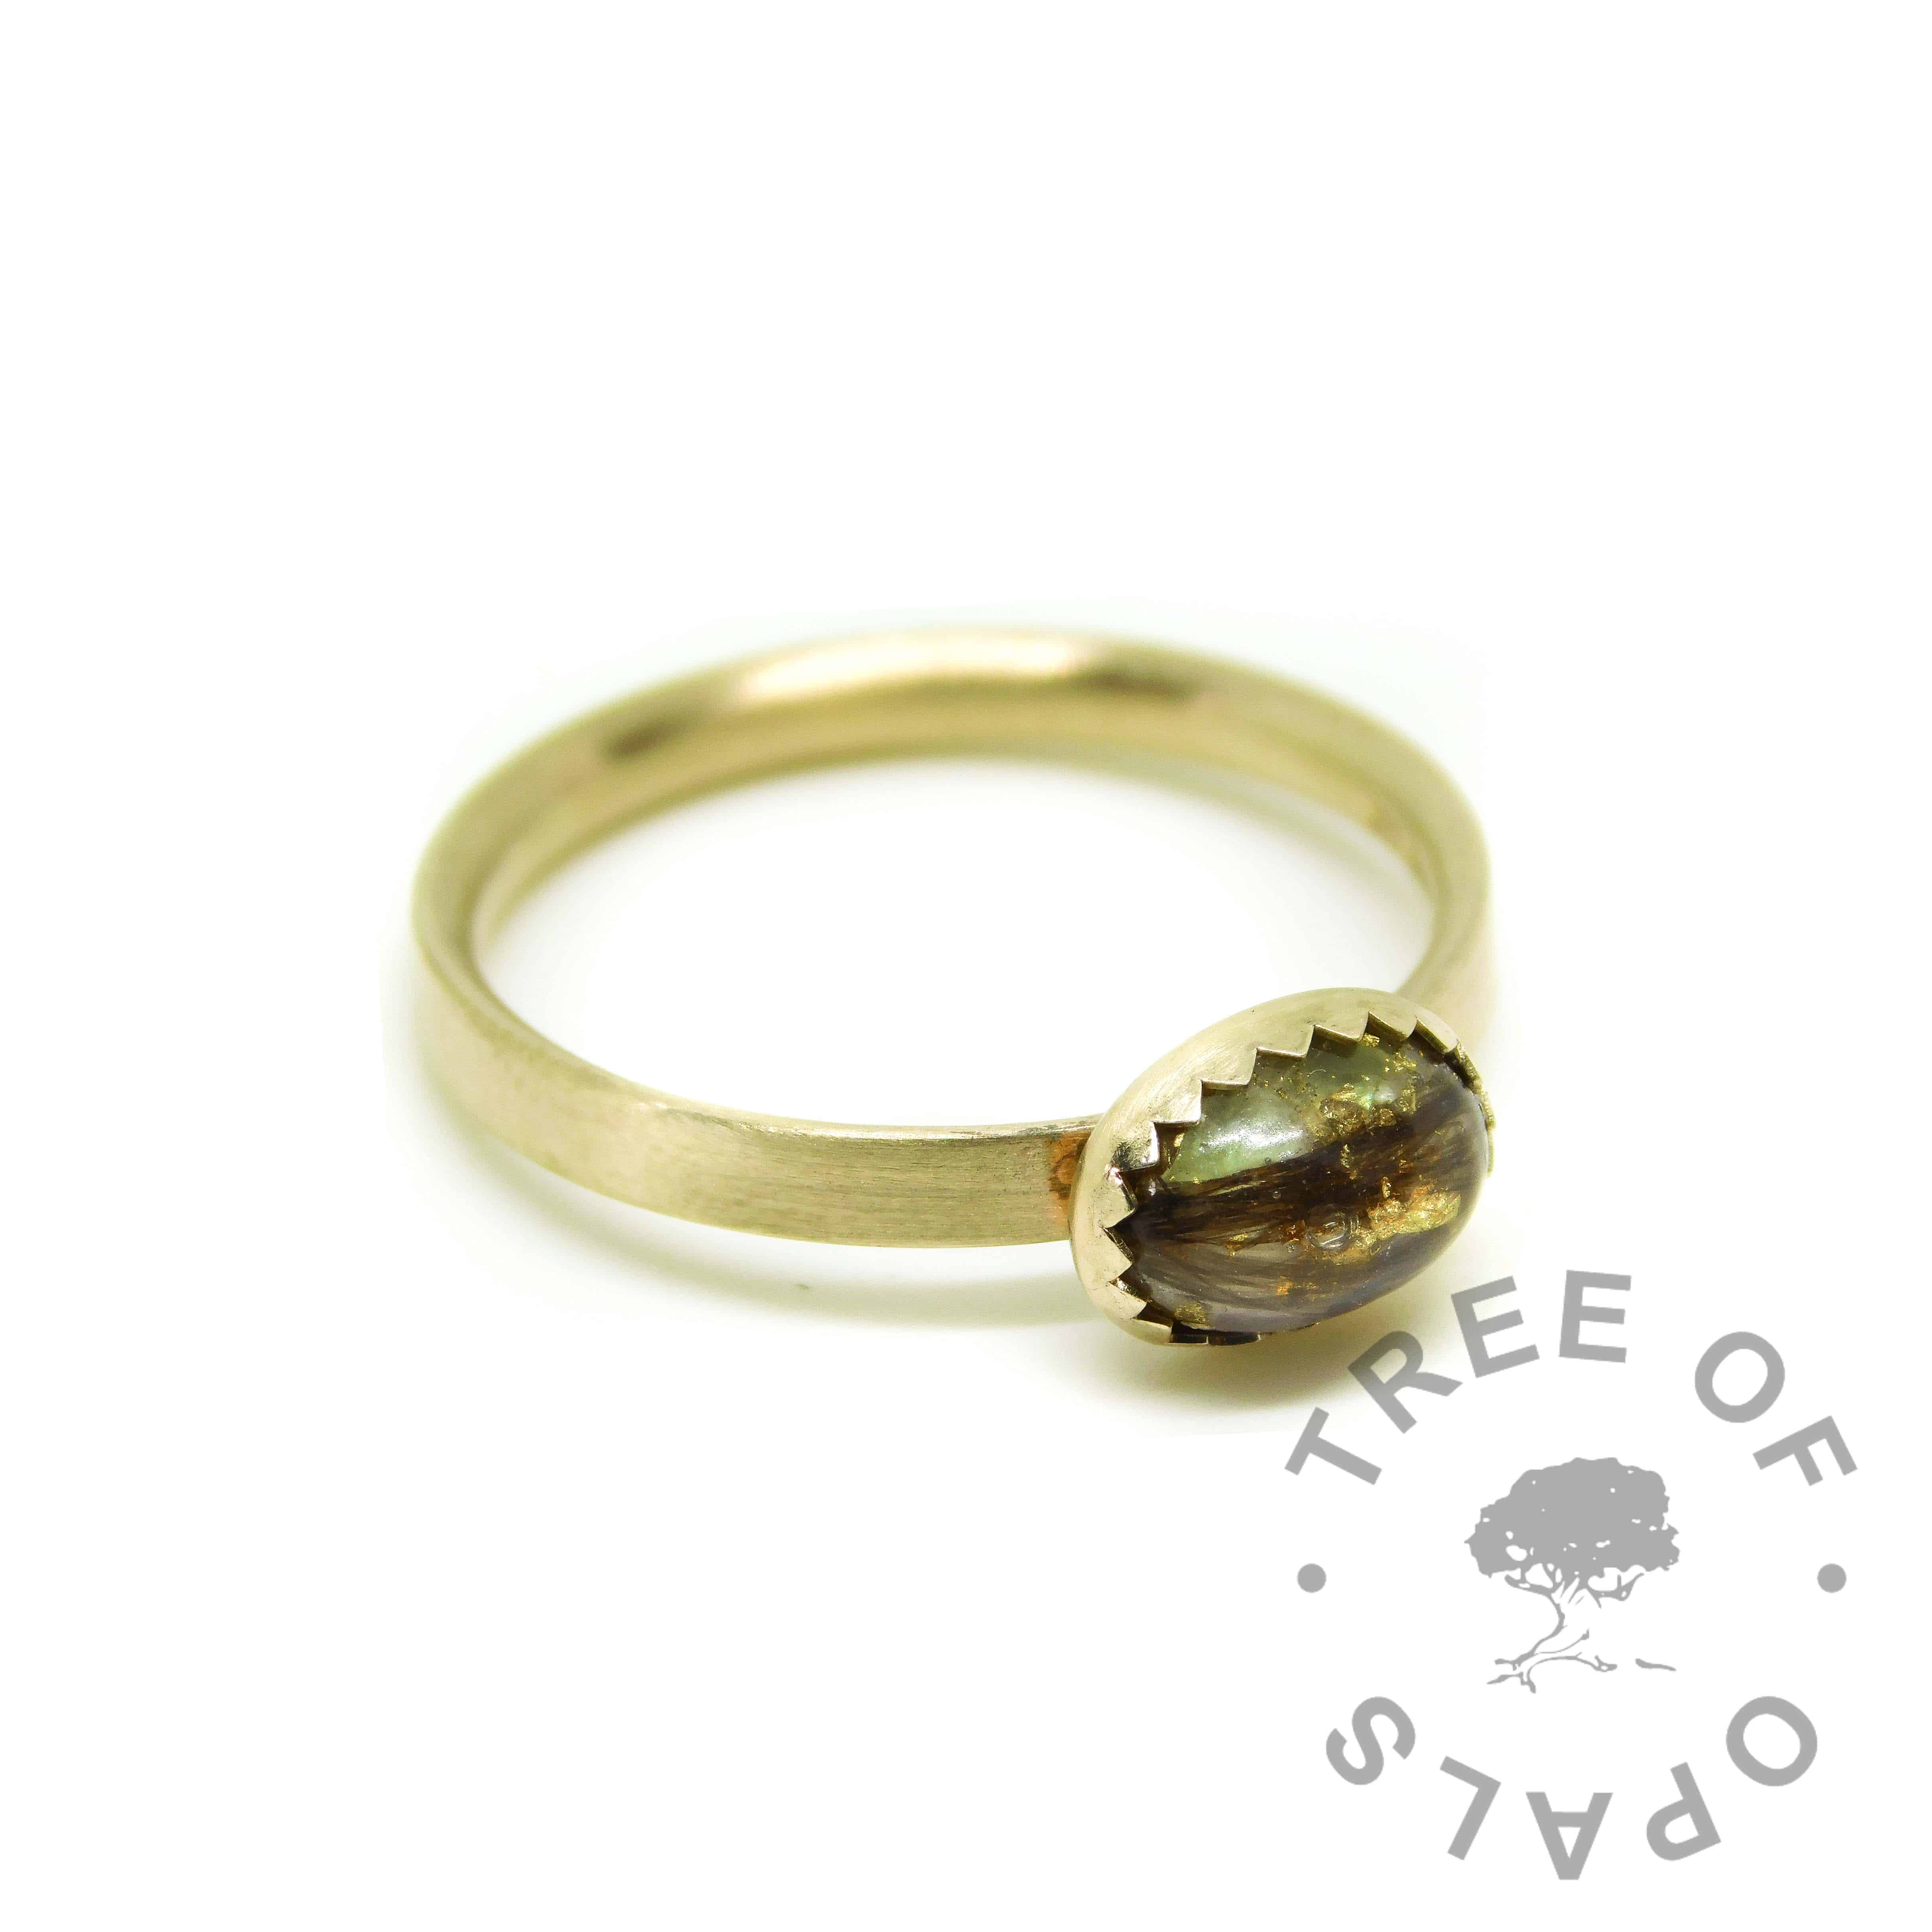 Solid gold lock of hair ring with unicorn white resin sparkle mix and August birthstone rough natural peridot, and gold leaf. Brushed band gold ring solid 14ct gold with serrated setting